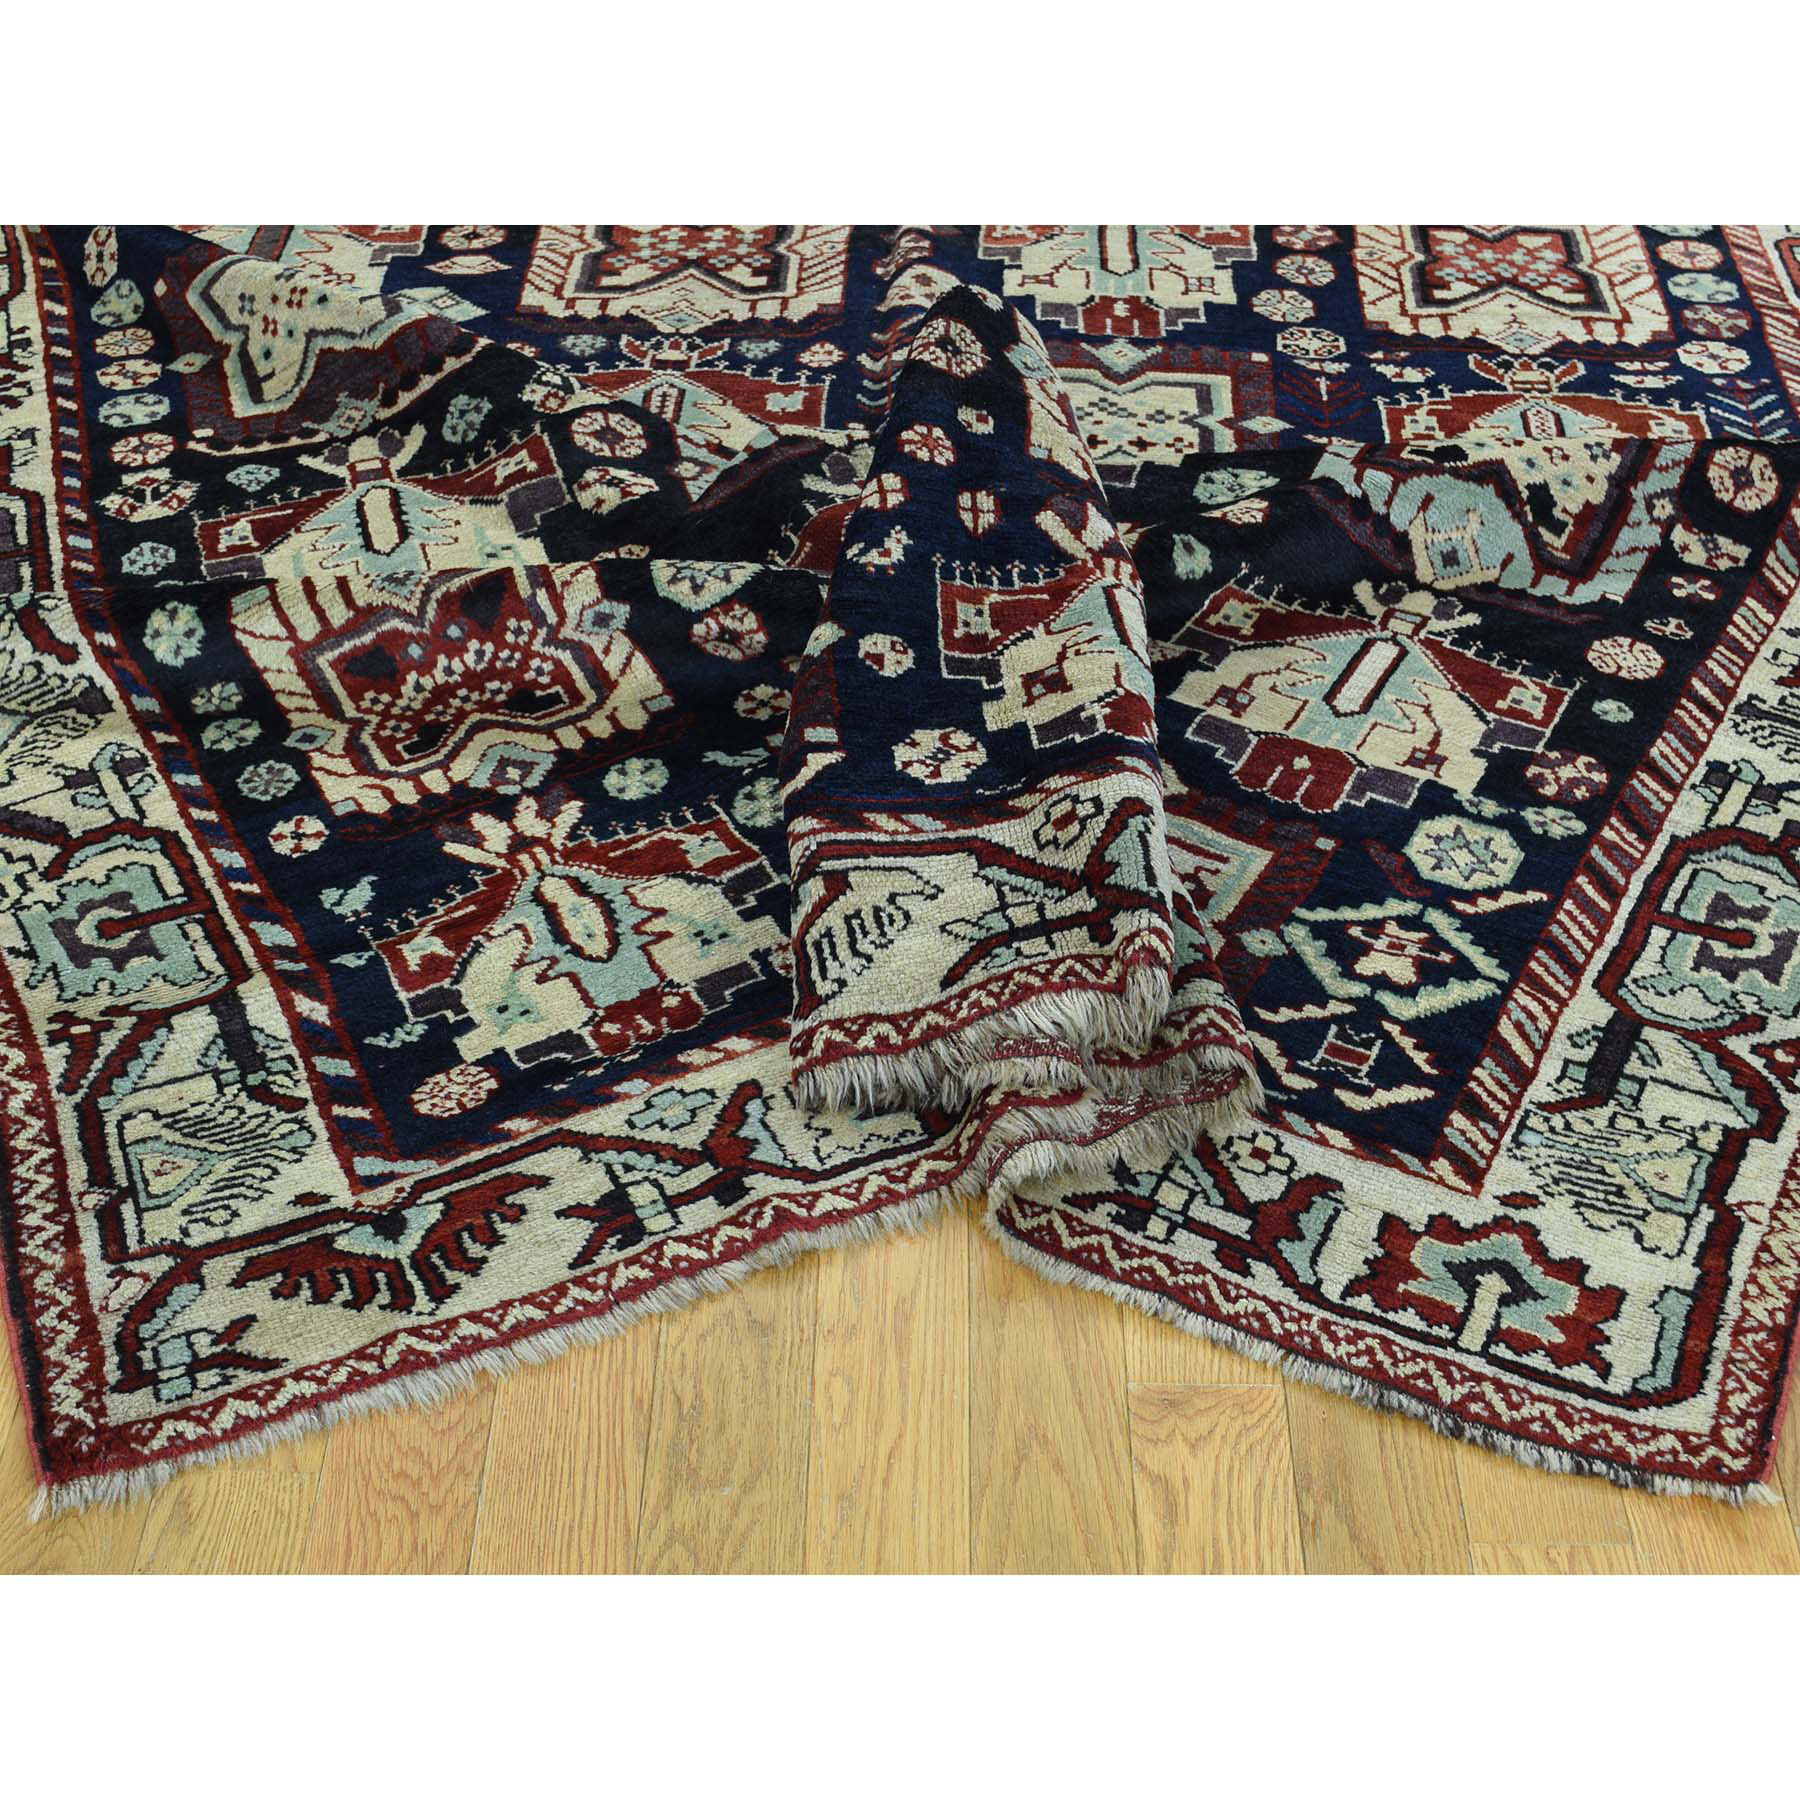 6-6 x10- Hand-Knotted Antique Persian Kurdish Full Pile Exc Cond Rug 